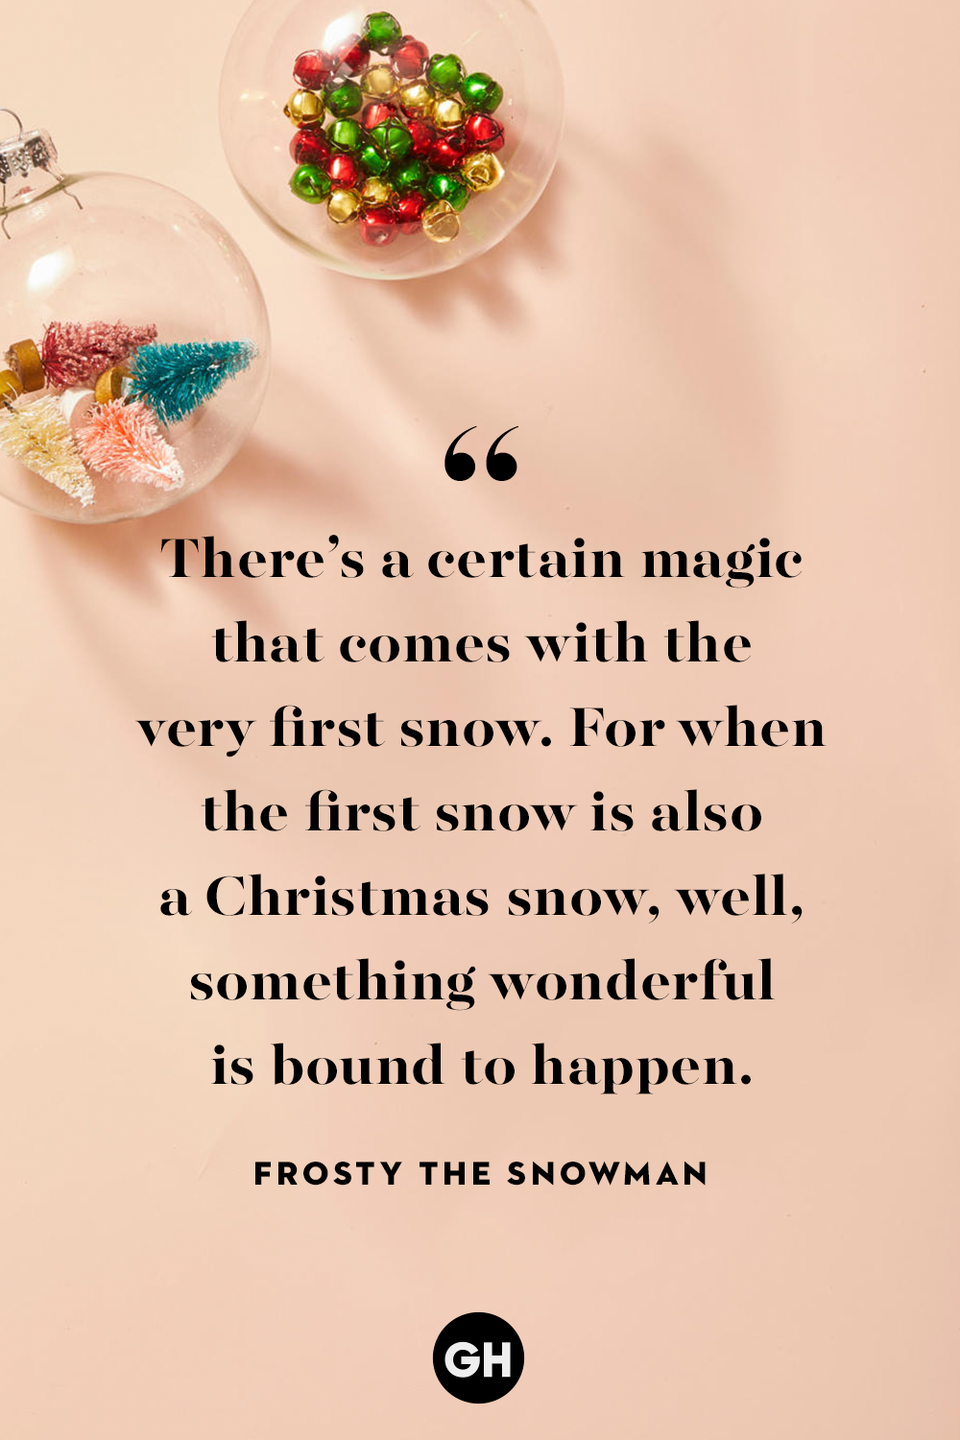 <p>There’s a certain magic that comes with the very first snow. For when the first snow is also a Christmas snow, well, something wonderful is bound to happen.</p>